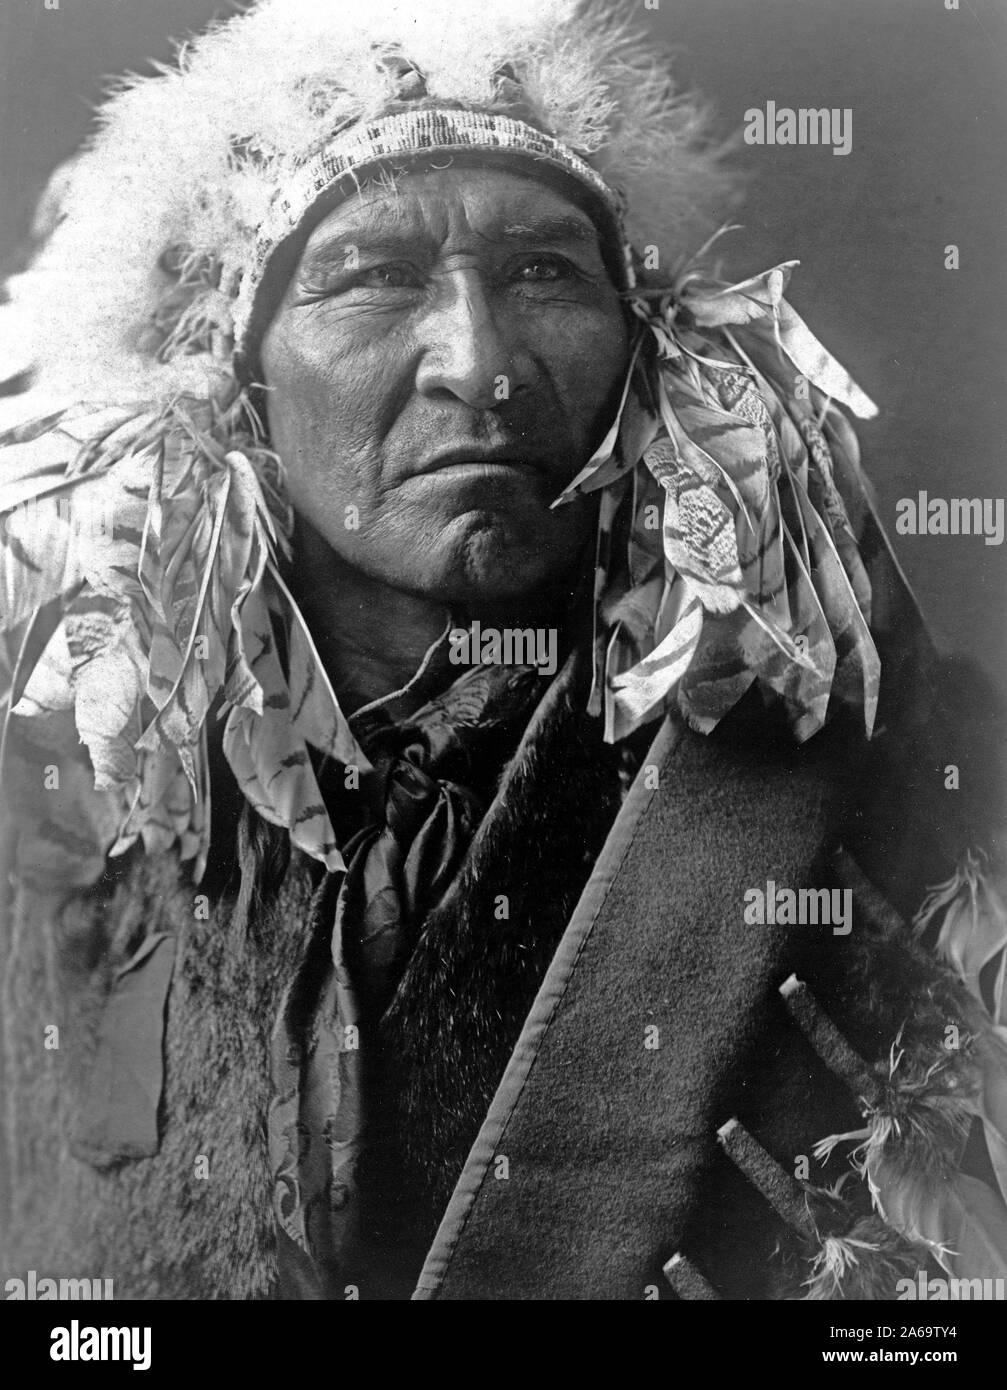 Edward S. Curits Native American Indians - Photograph shows Bread, an ...